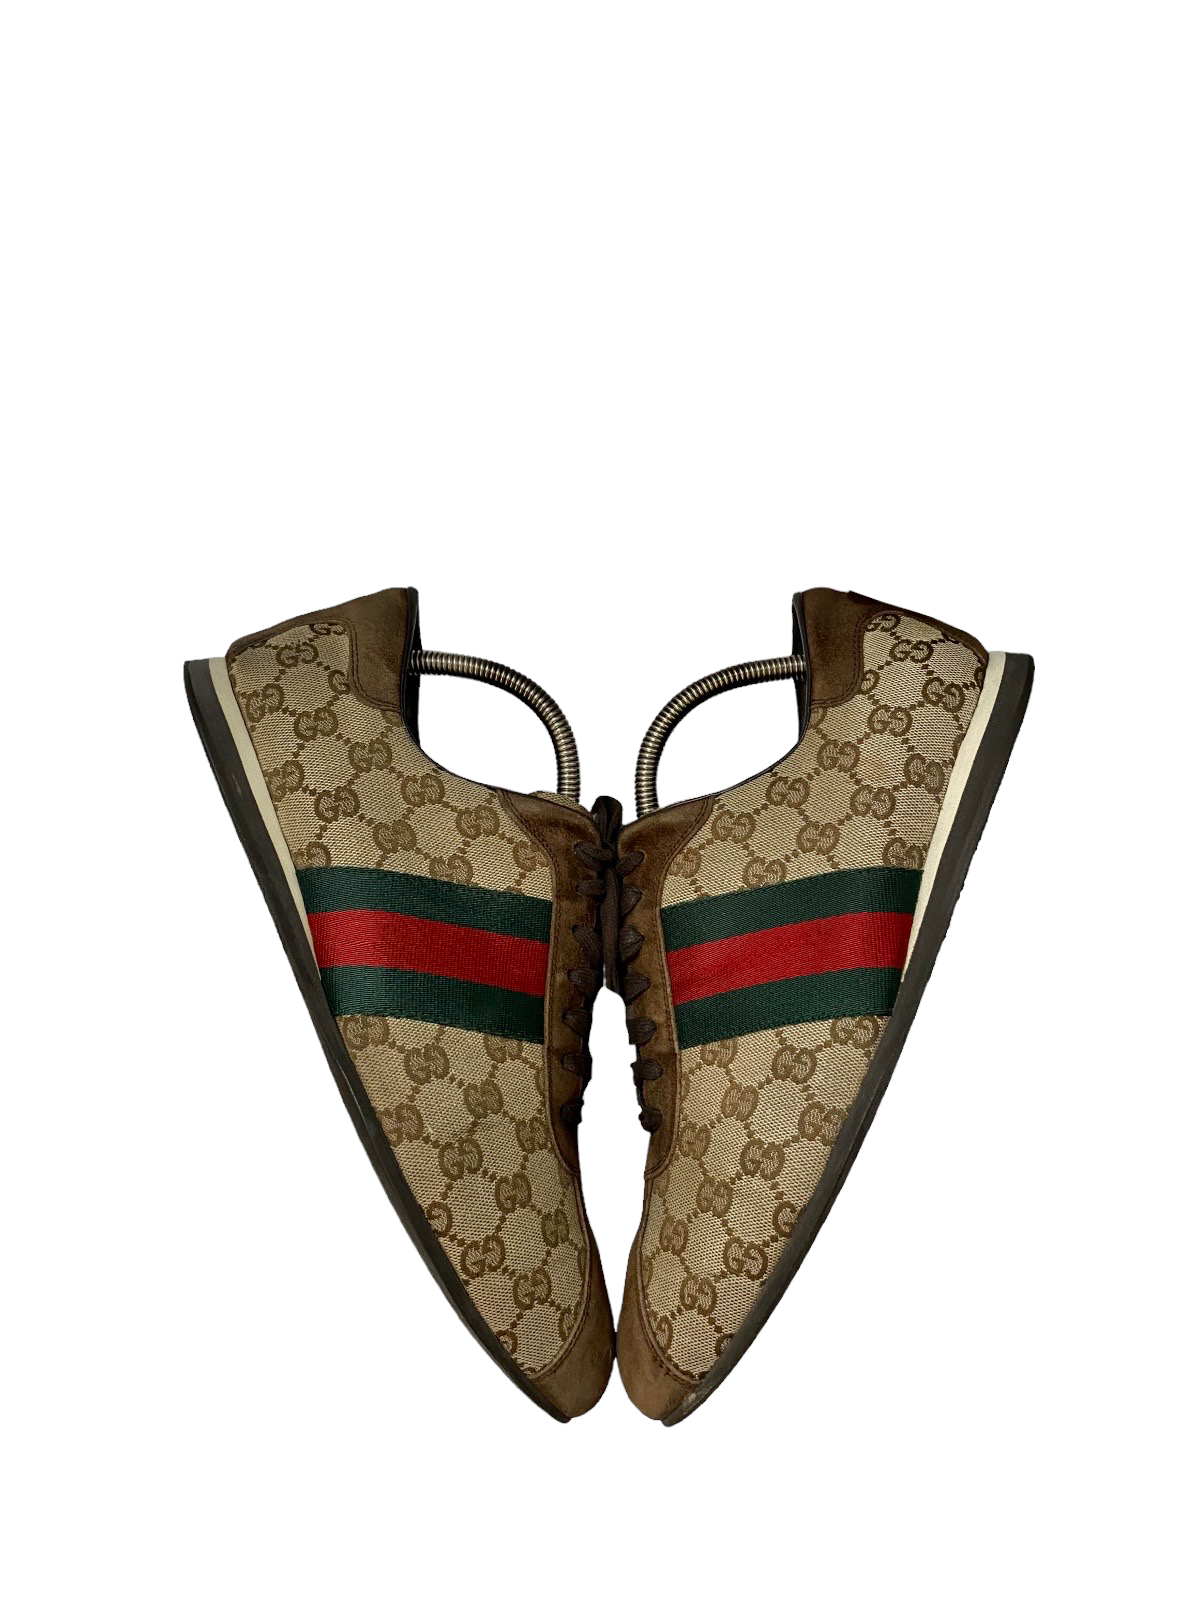 Buy authentic pre-owned Gucci |SELLUXURY international marketplace